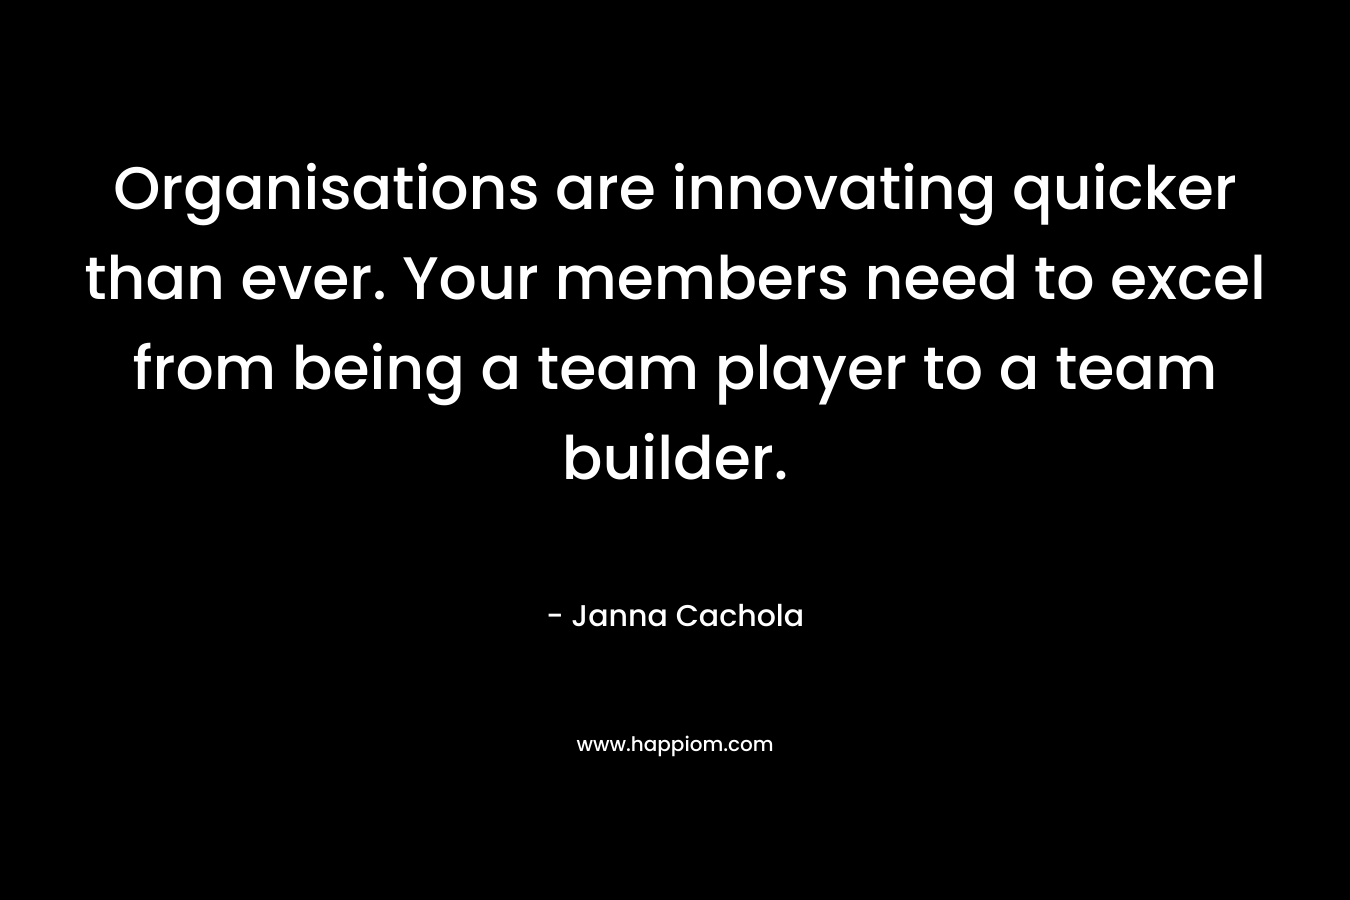 Organisations are innovating quicker than ever. Your members need to excel from being a team player to a team builder. – Janna Cachola